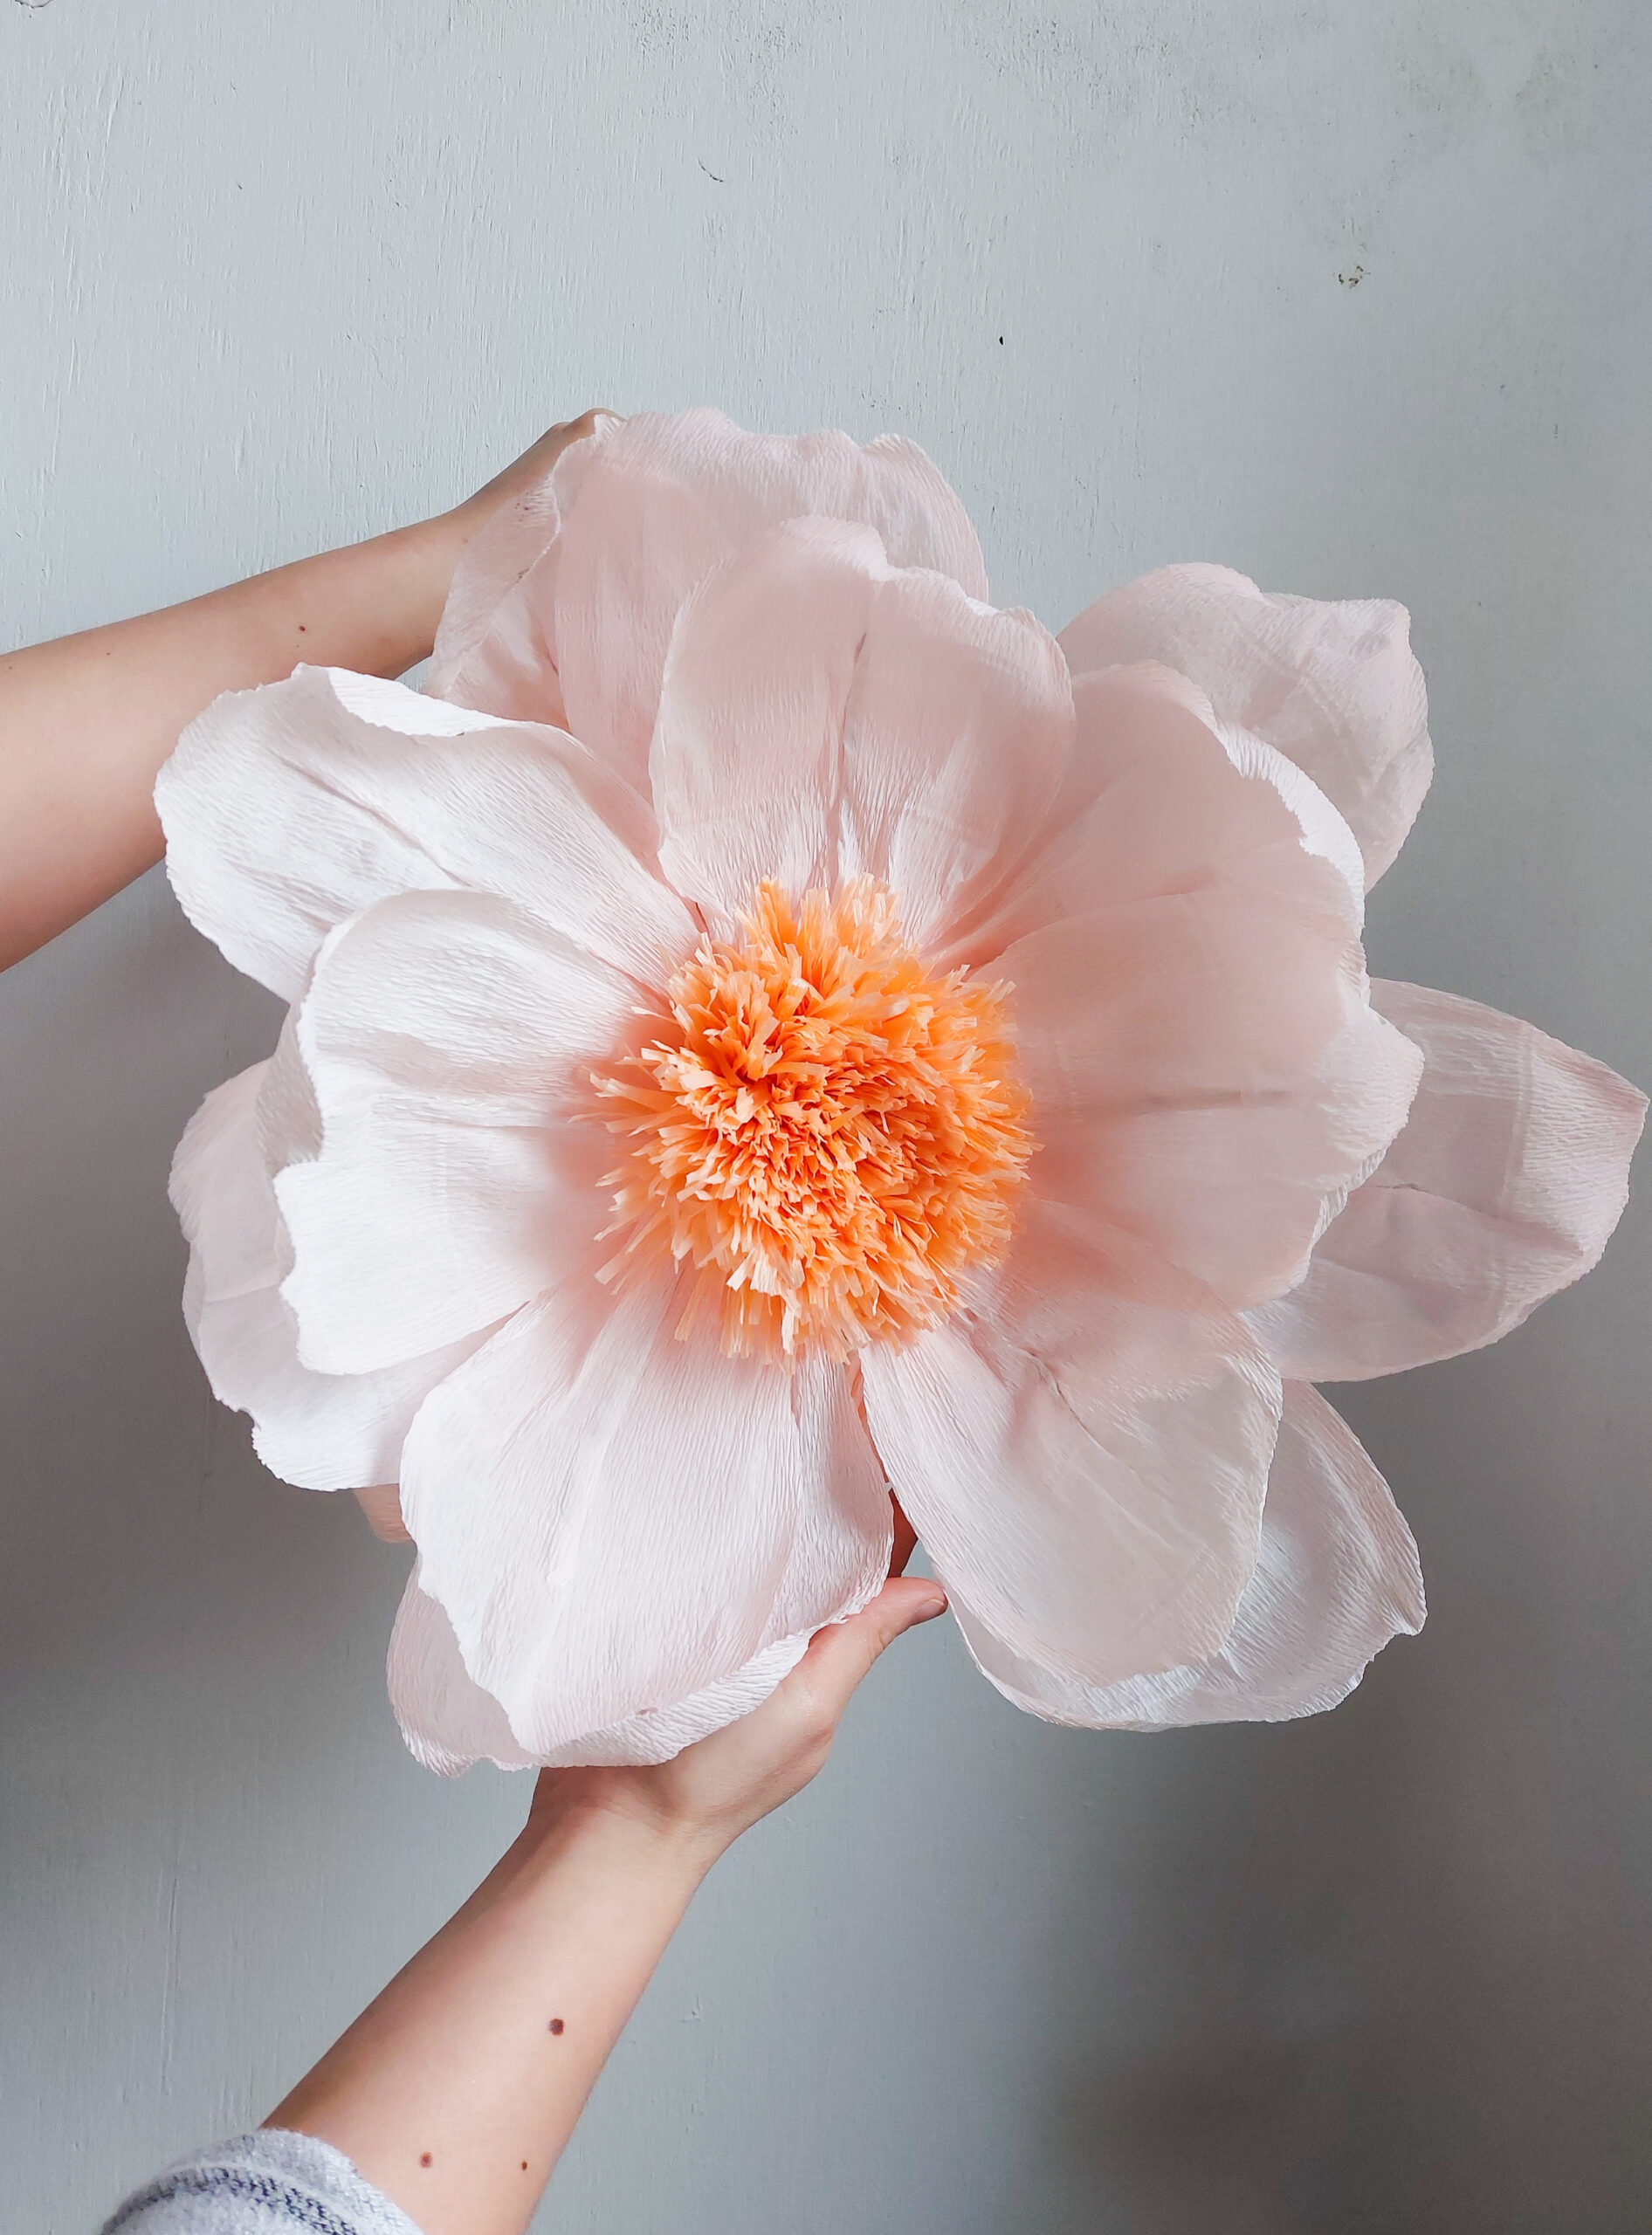 Large Crepe Paper Wall Flower